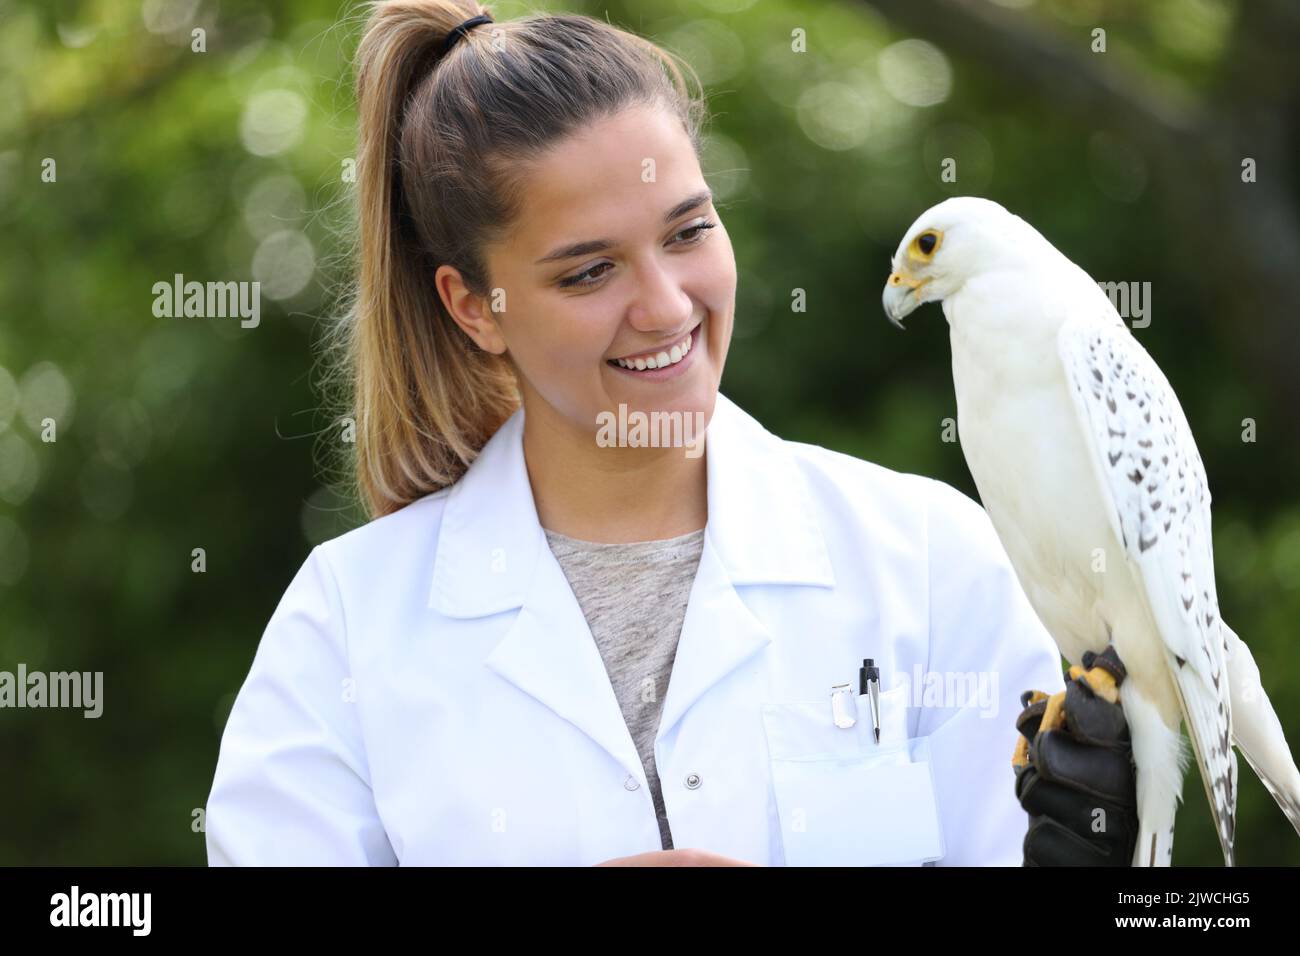 Happy veterinary holding a falcon outdoors in nature Stock Photo